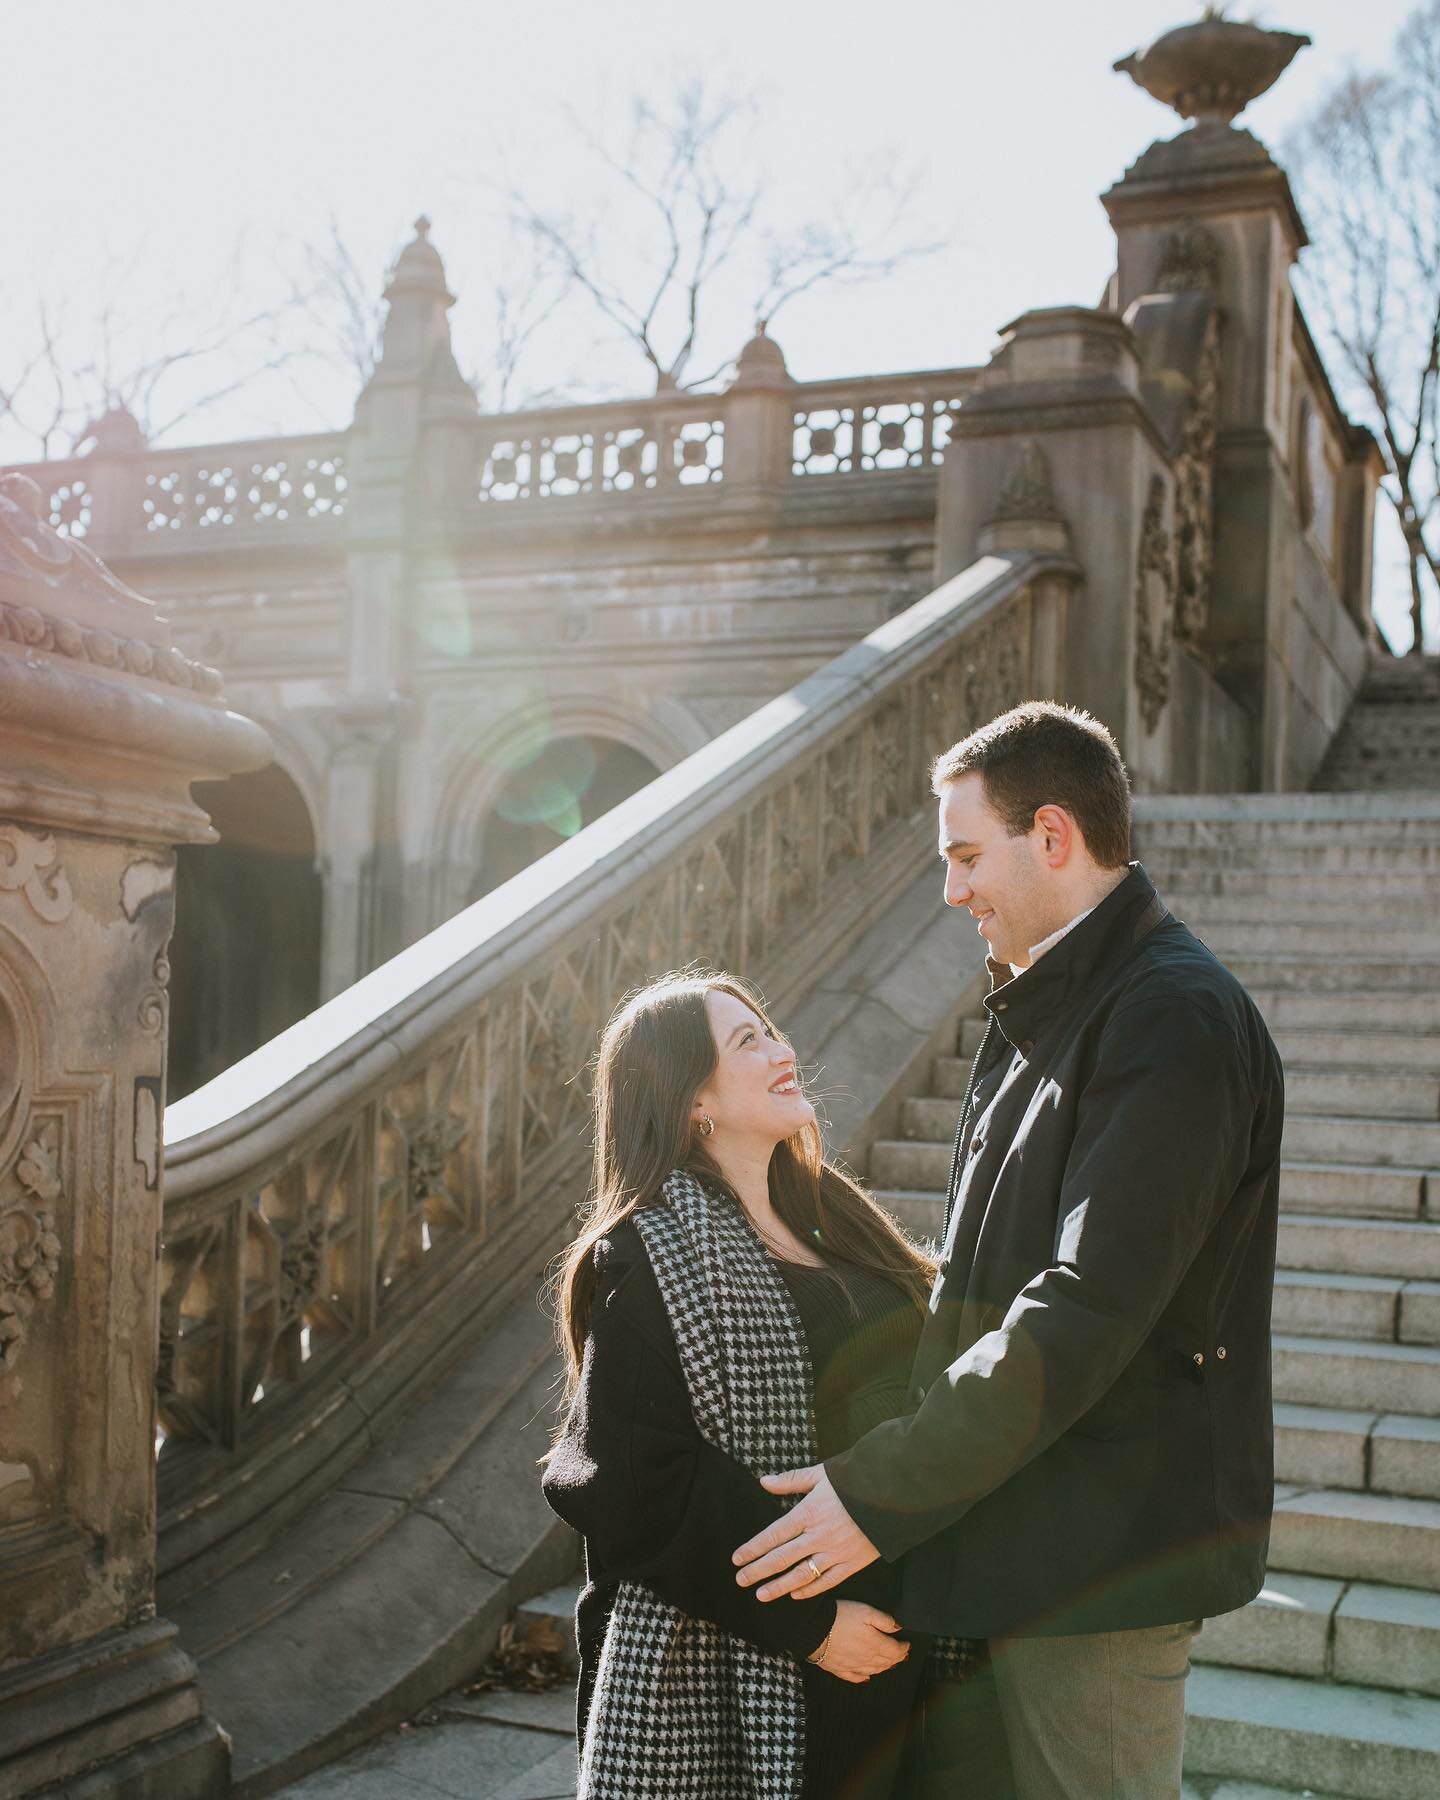 The most lovely maternity session from a few weeks ago in Central Park✨
.
.
.
.
#nycfamilyphotographer #nycphotographer #newyorkphotographer #centralpark #nycweddingphotographer #nycweddingphotography #newyorkweddingphotographer #nycengagementphotogr